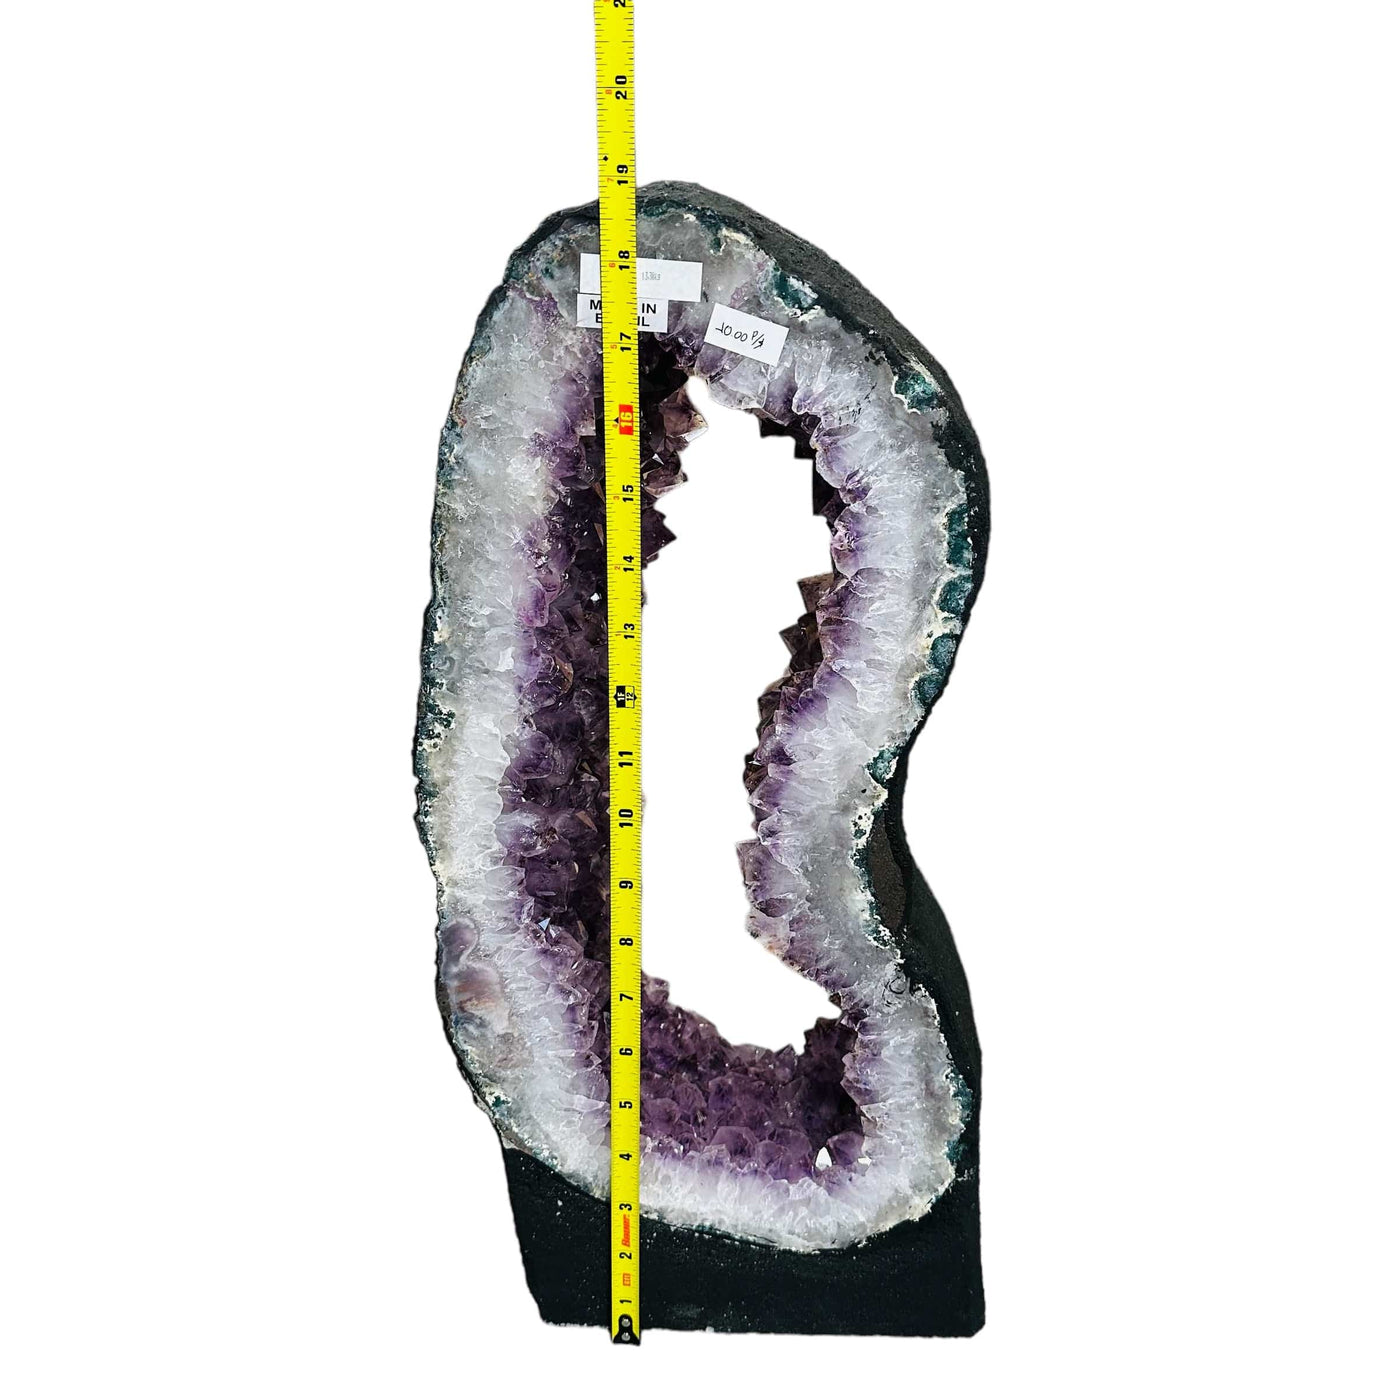 Amethyst Crystal Portal next to a ruler for size reference 